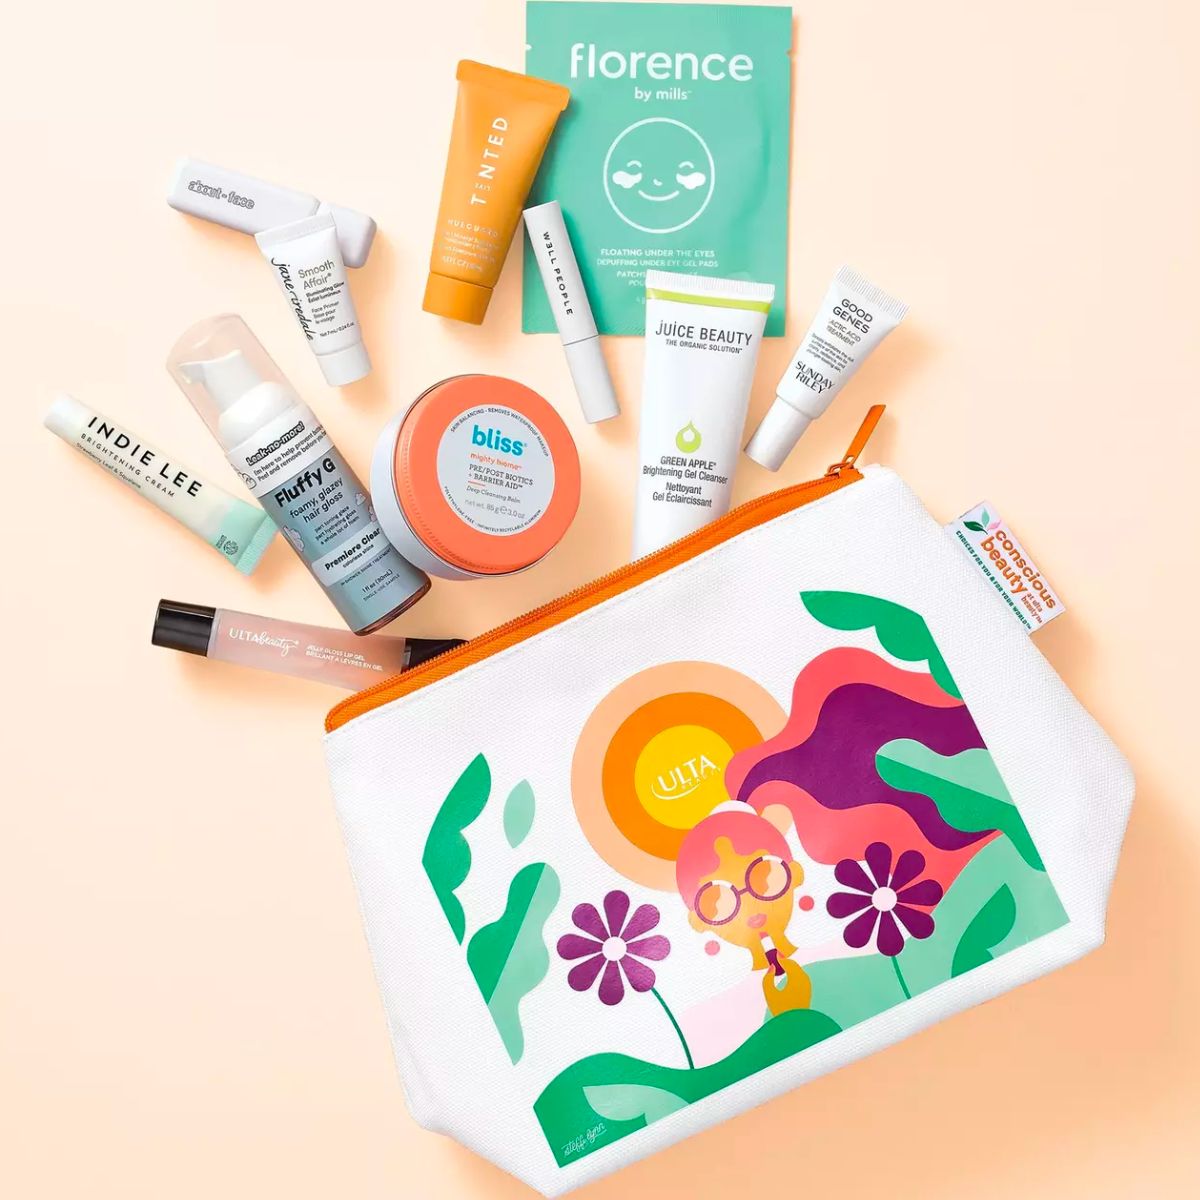 Ulta conscious beauty discovery kit with included skin care hair care and makeup items